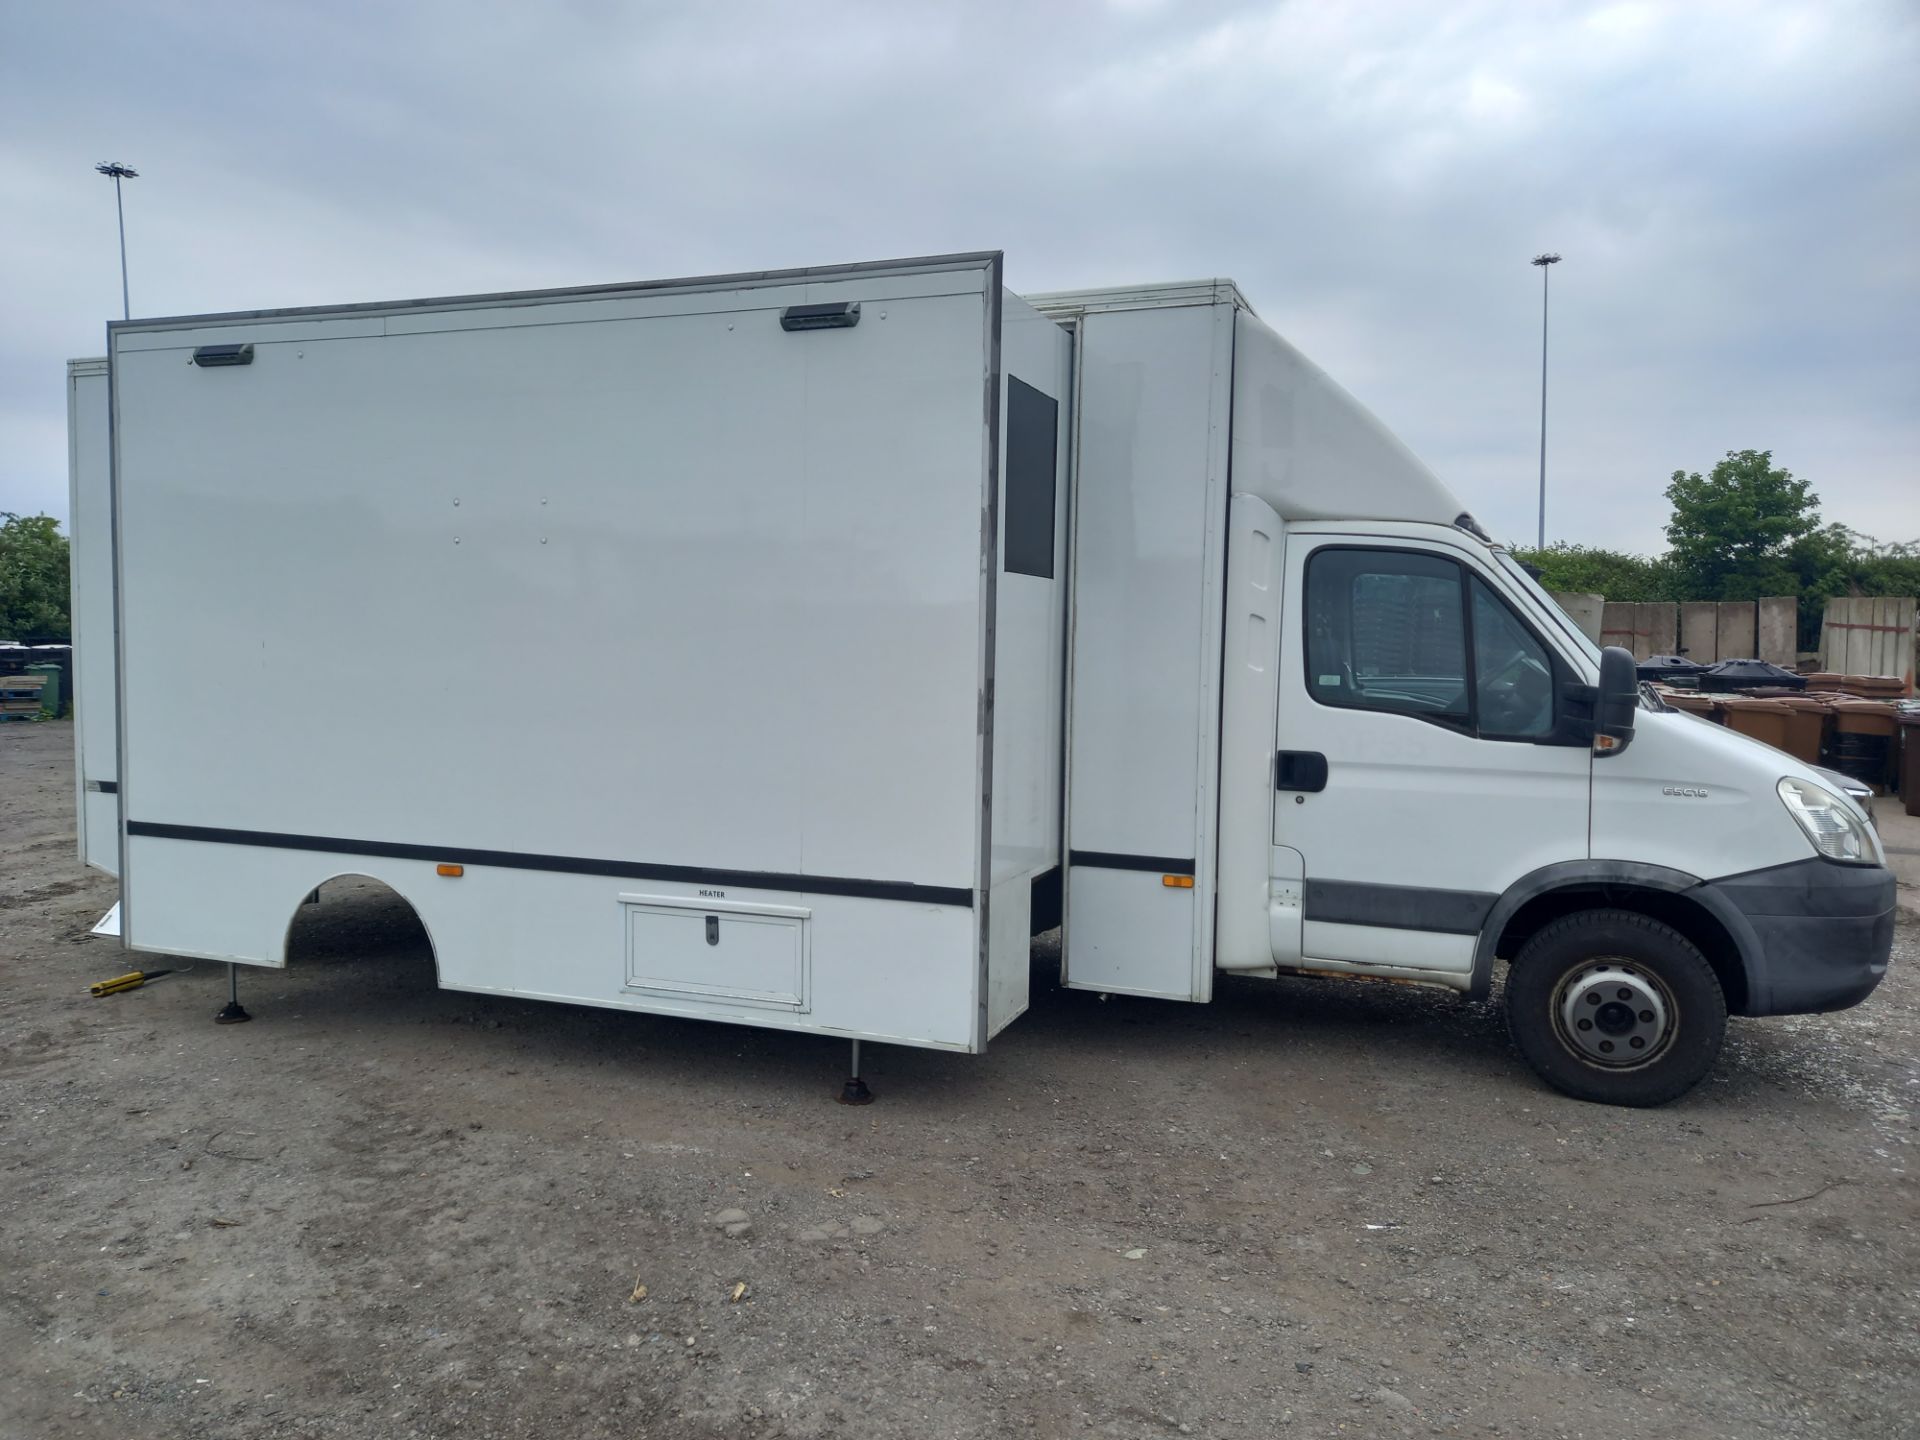 Community Outreach Vehicle/Camper Van Conversion. - Image 4 of 30